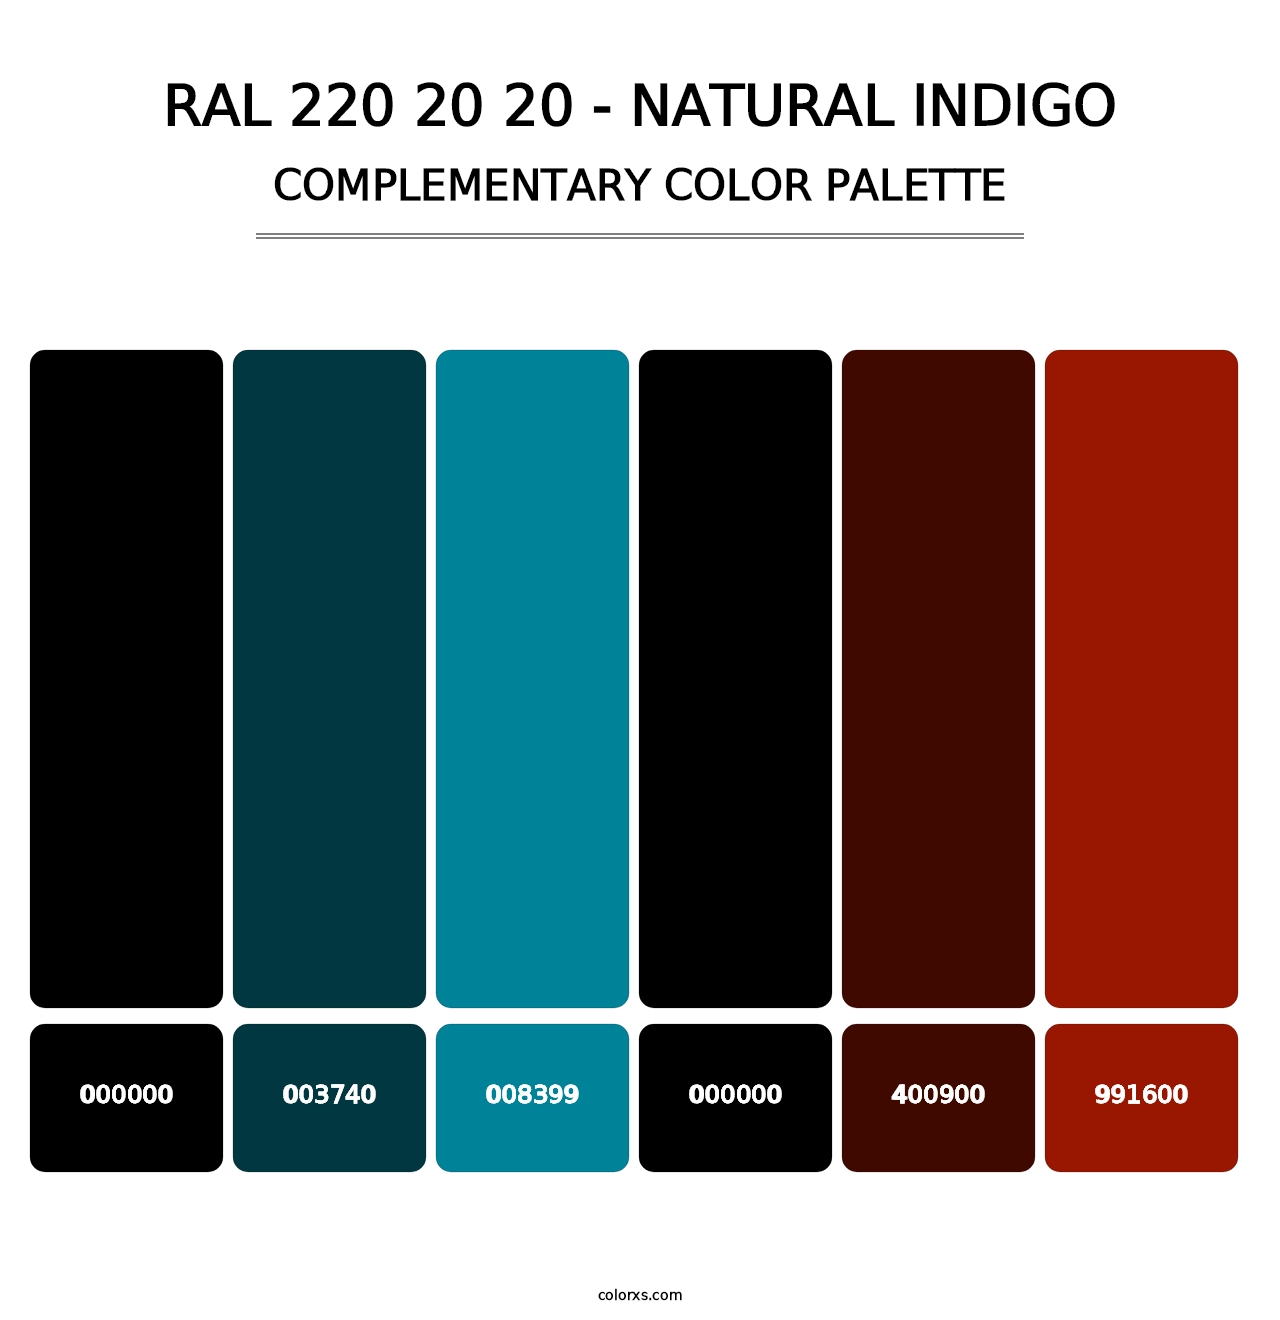 RAL 220 20 20 - Natural Indigo - Complementary Color Palette